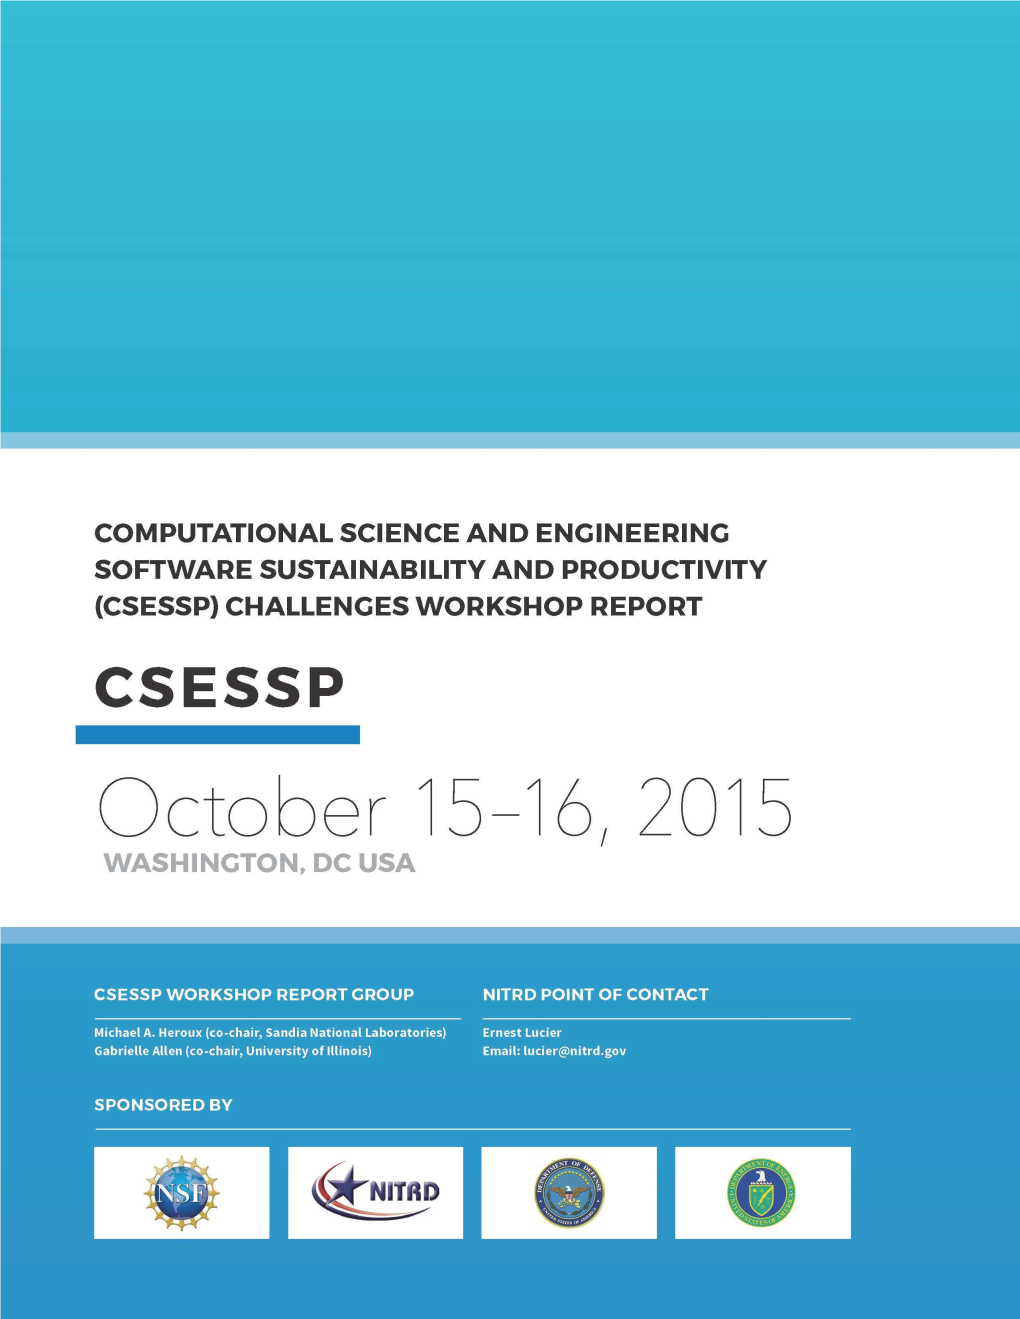 COMPUTATIONAL SCIENCE and ENGINEERING SOFTWARE SUSTAINABILITY and PRODUCTIVITY (CSESSP) CHALLENGES WORKSHOP REPORT CSESSP October 15-16, 2015 WASHINGTON, DC USA